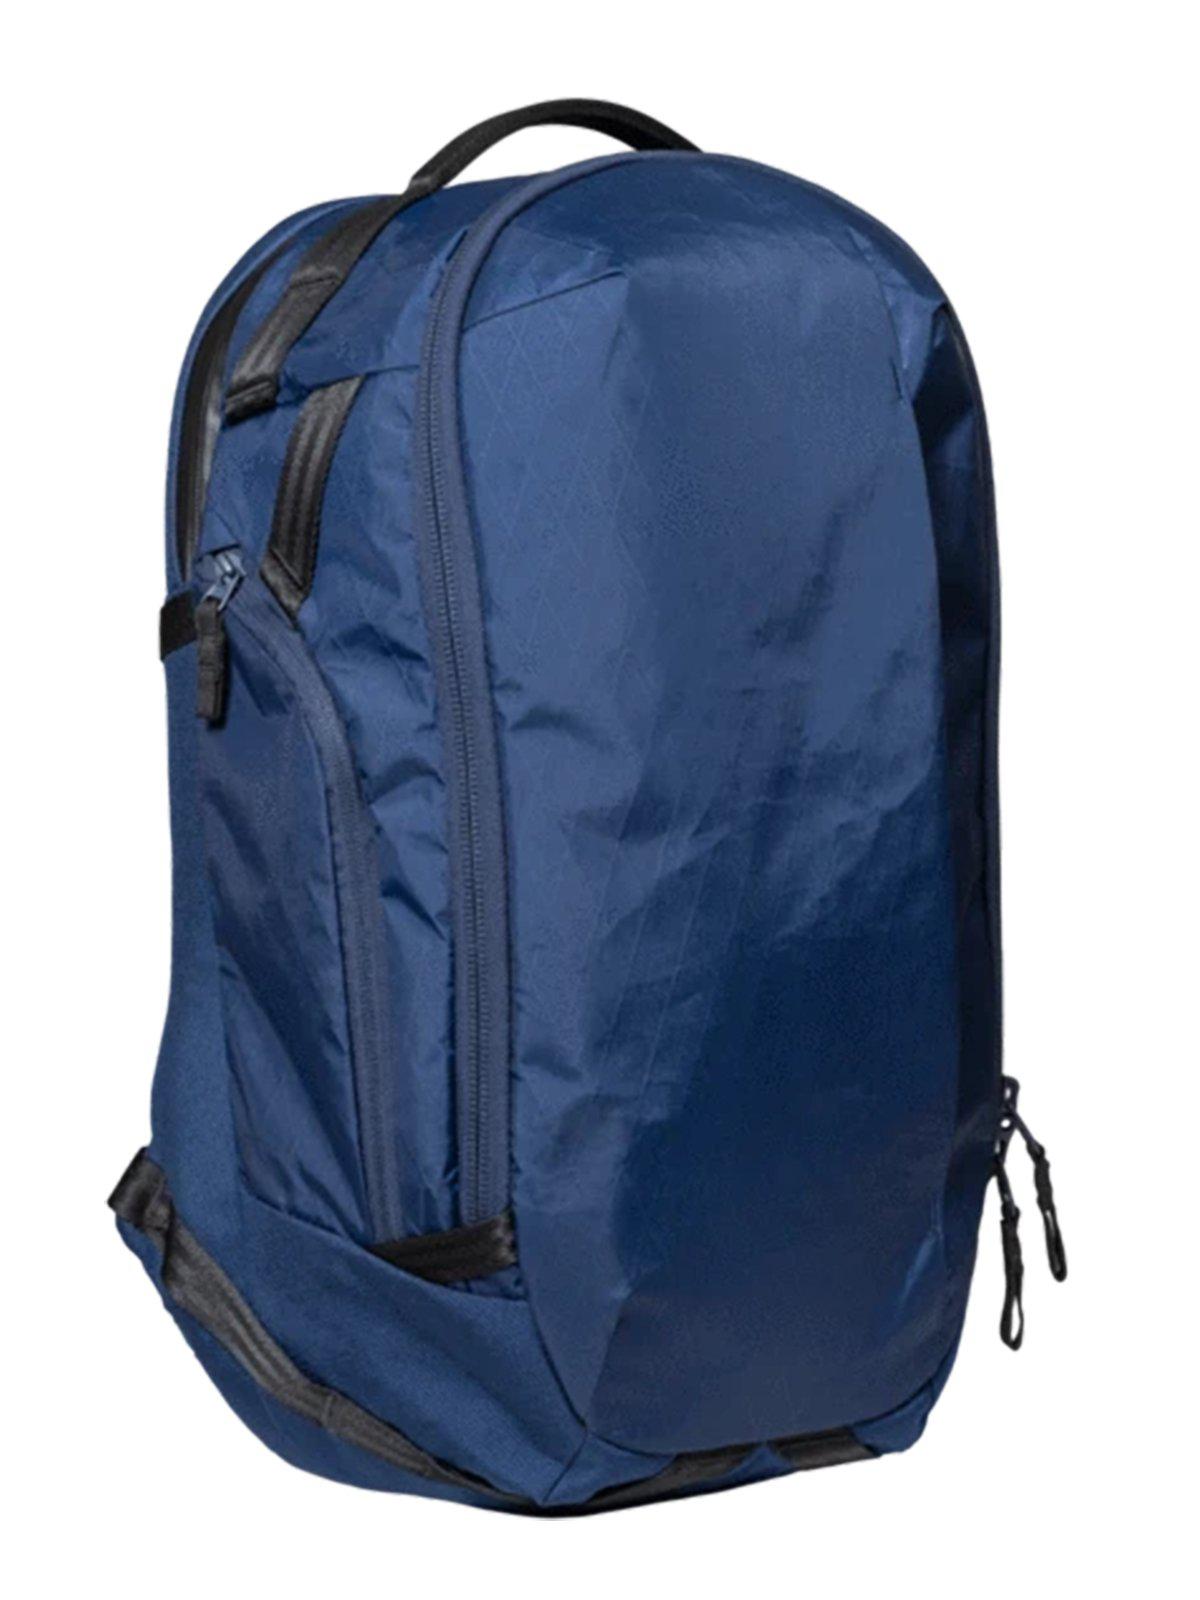 Able Carry Max Backpack Ocean Blue